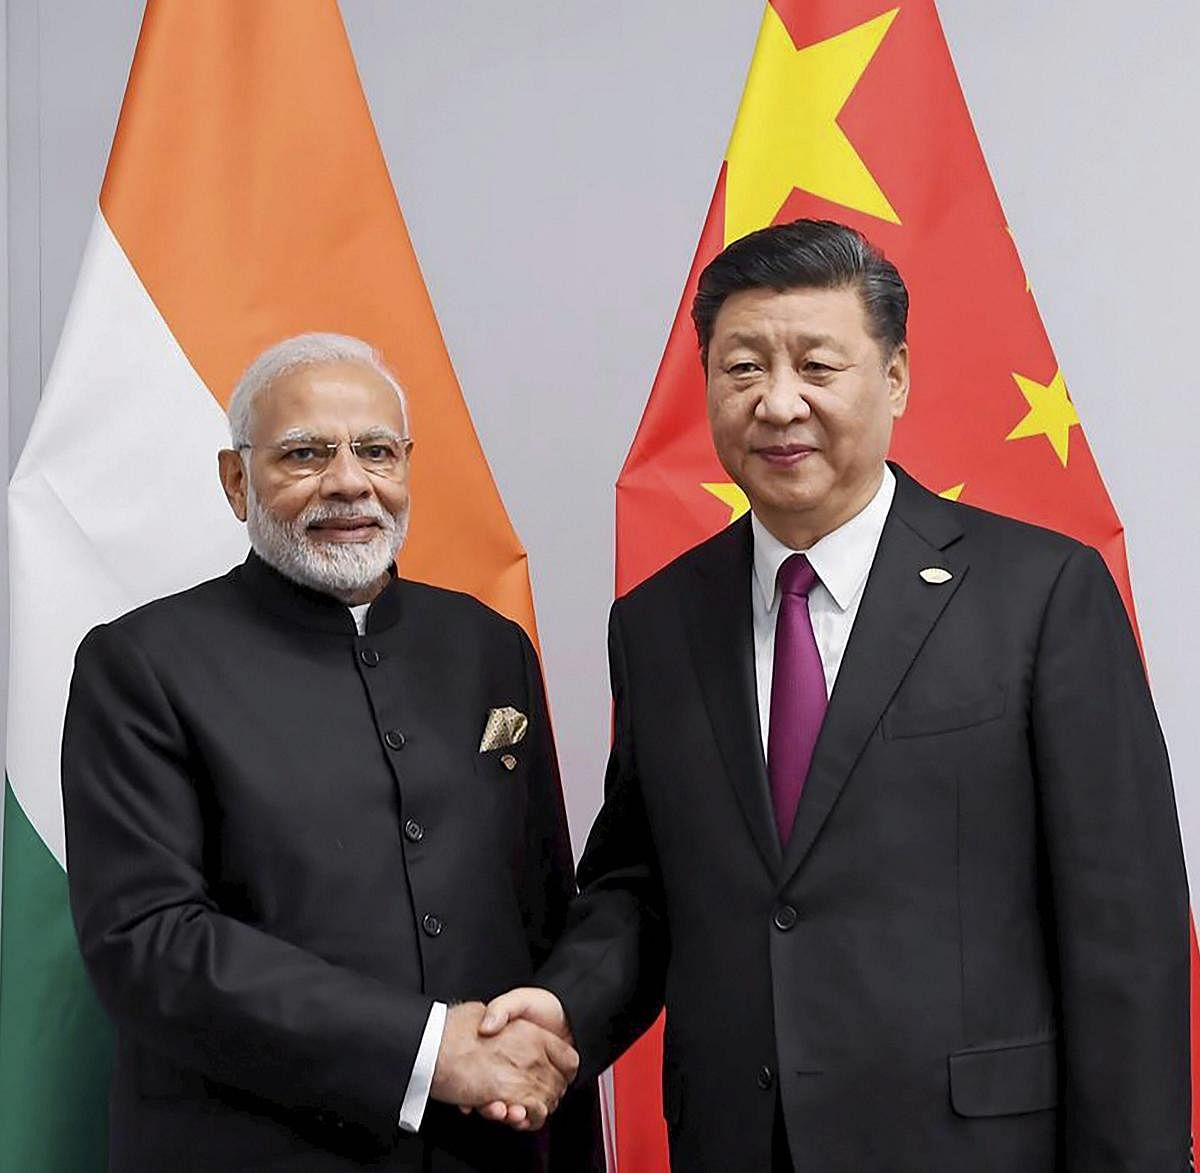 China asks India to join fight against 'unilateralism'